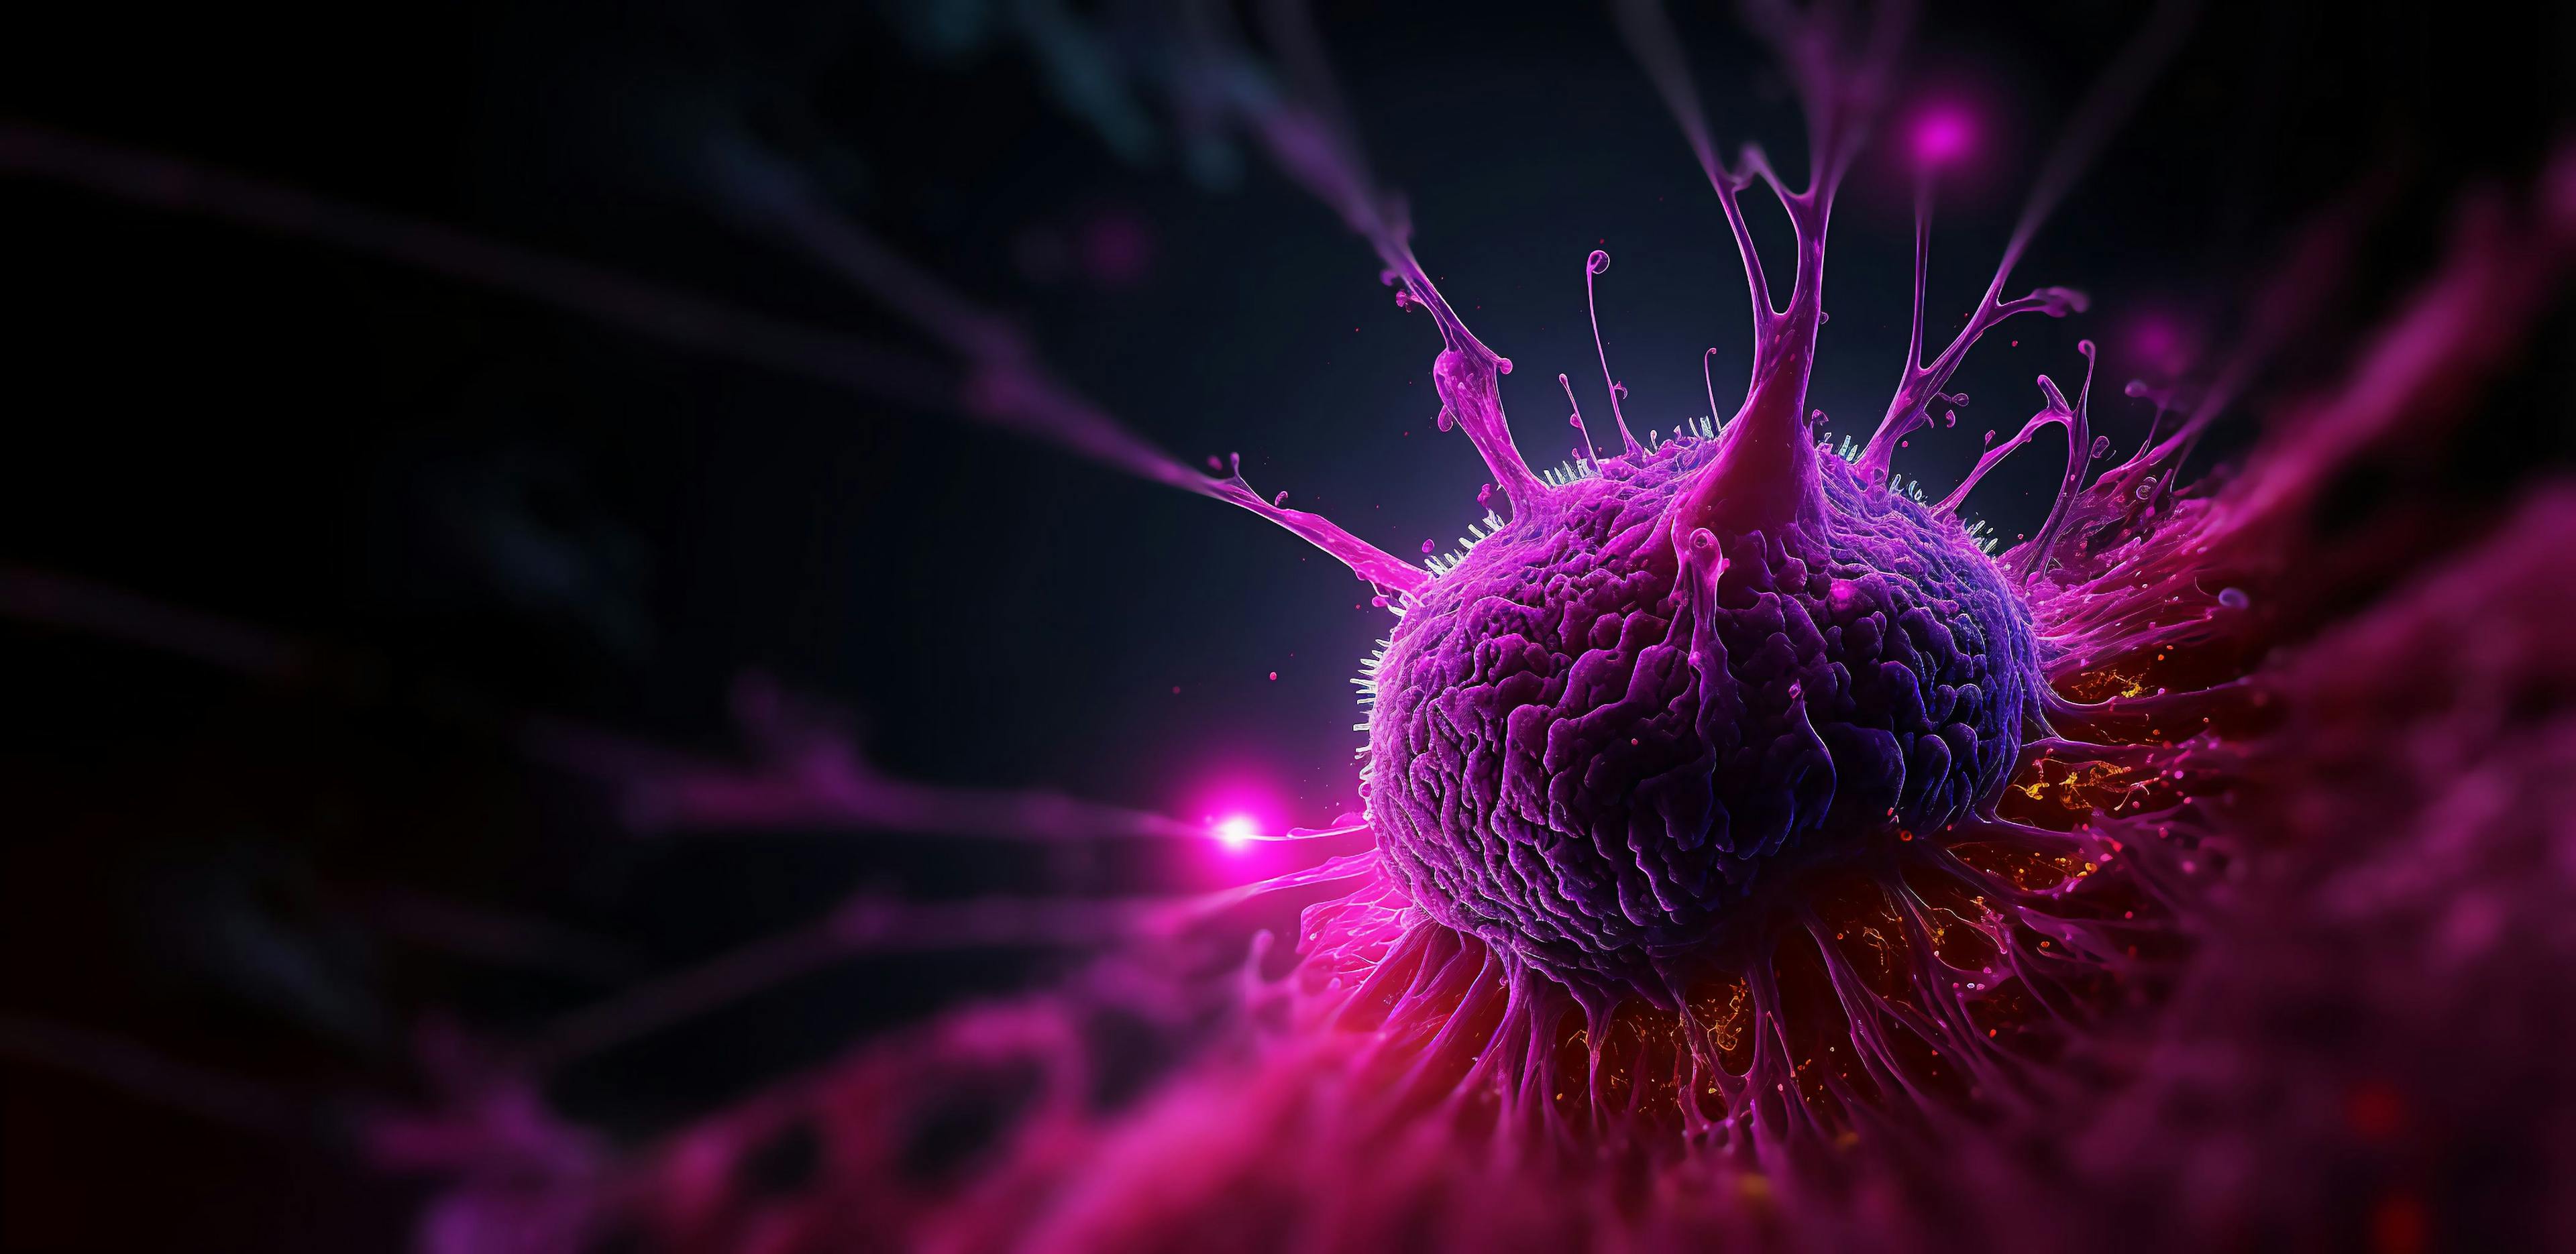 Of the 1.6 million patients in the study who were admitted in the hospital from April to December 2020 with COVID-19, 76,655 had a diagnosis of a malignant neoplasm.  © catalin - stock.adobe.com